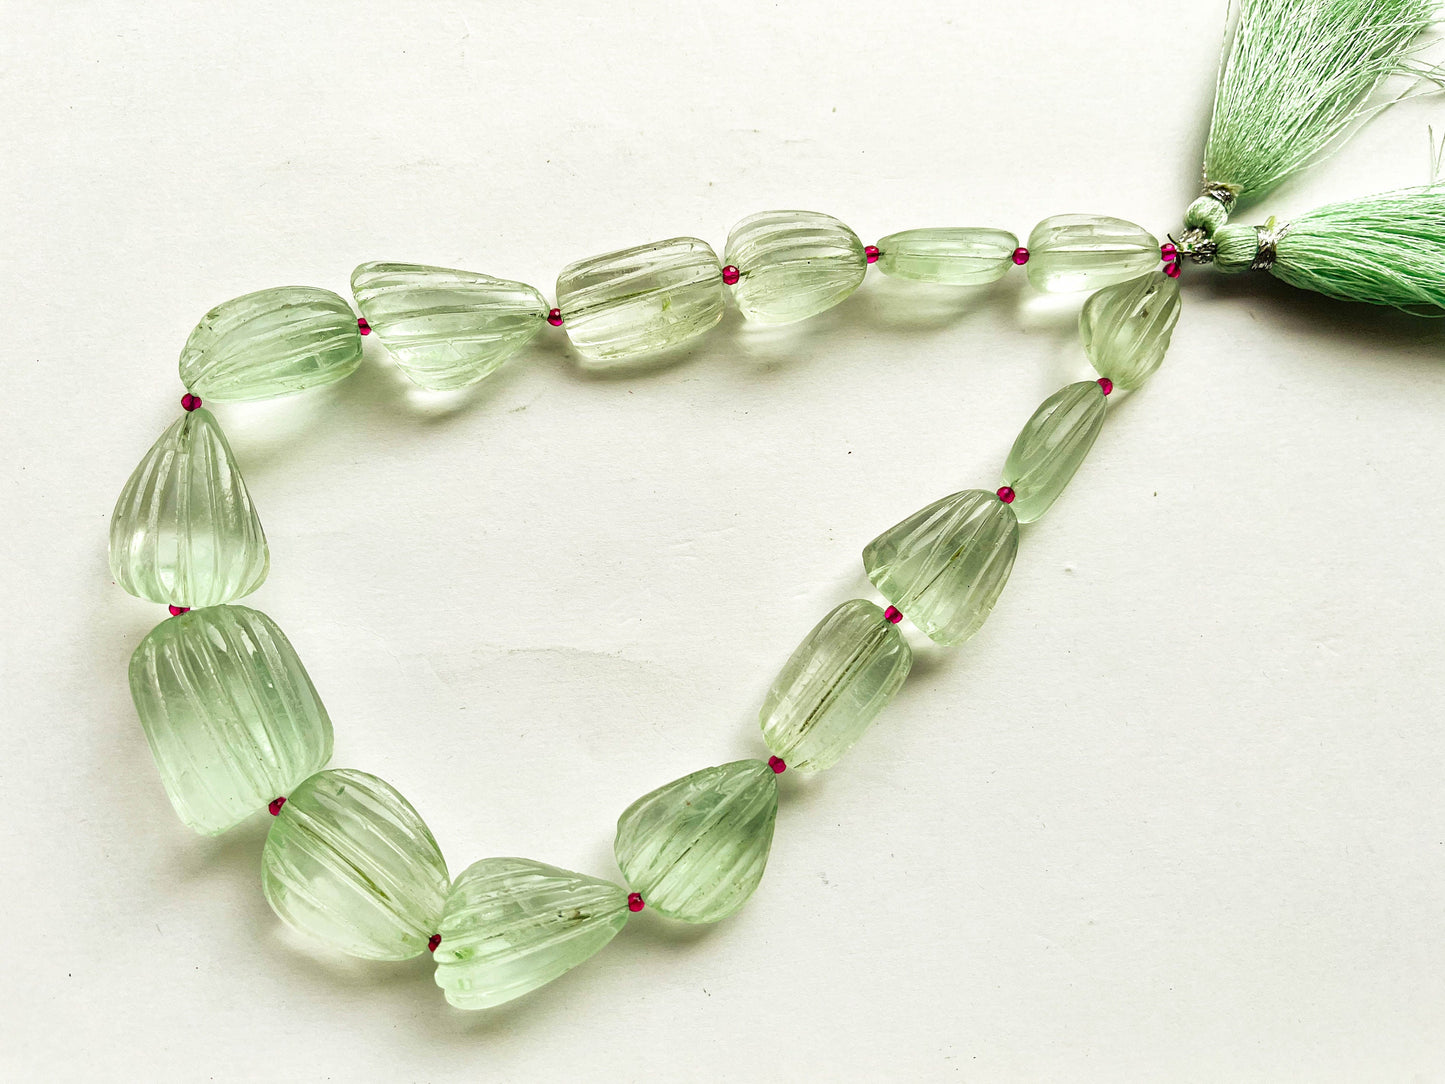 Natural Green Fluorite Uneven Shape Carved Nugget Beads, Green Fluorite carving beads, 13x18mm to 19x27mm, 14 Inch String, 15 Pieces